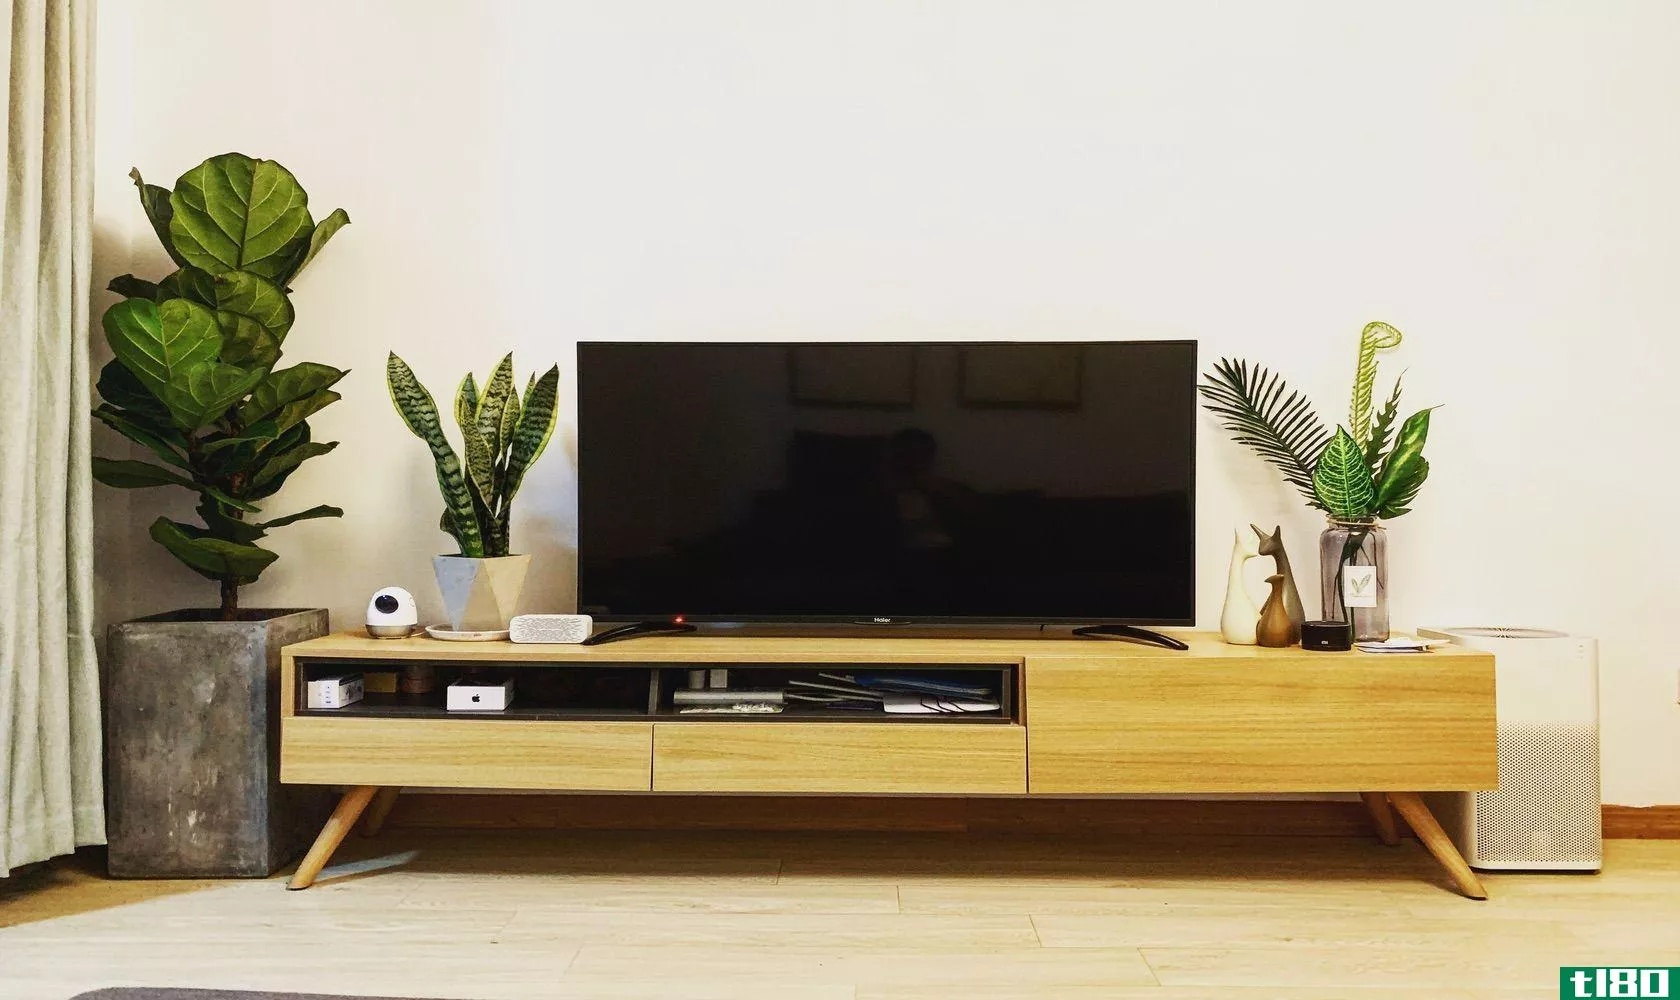 television on TV stand